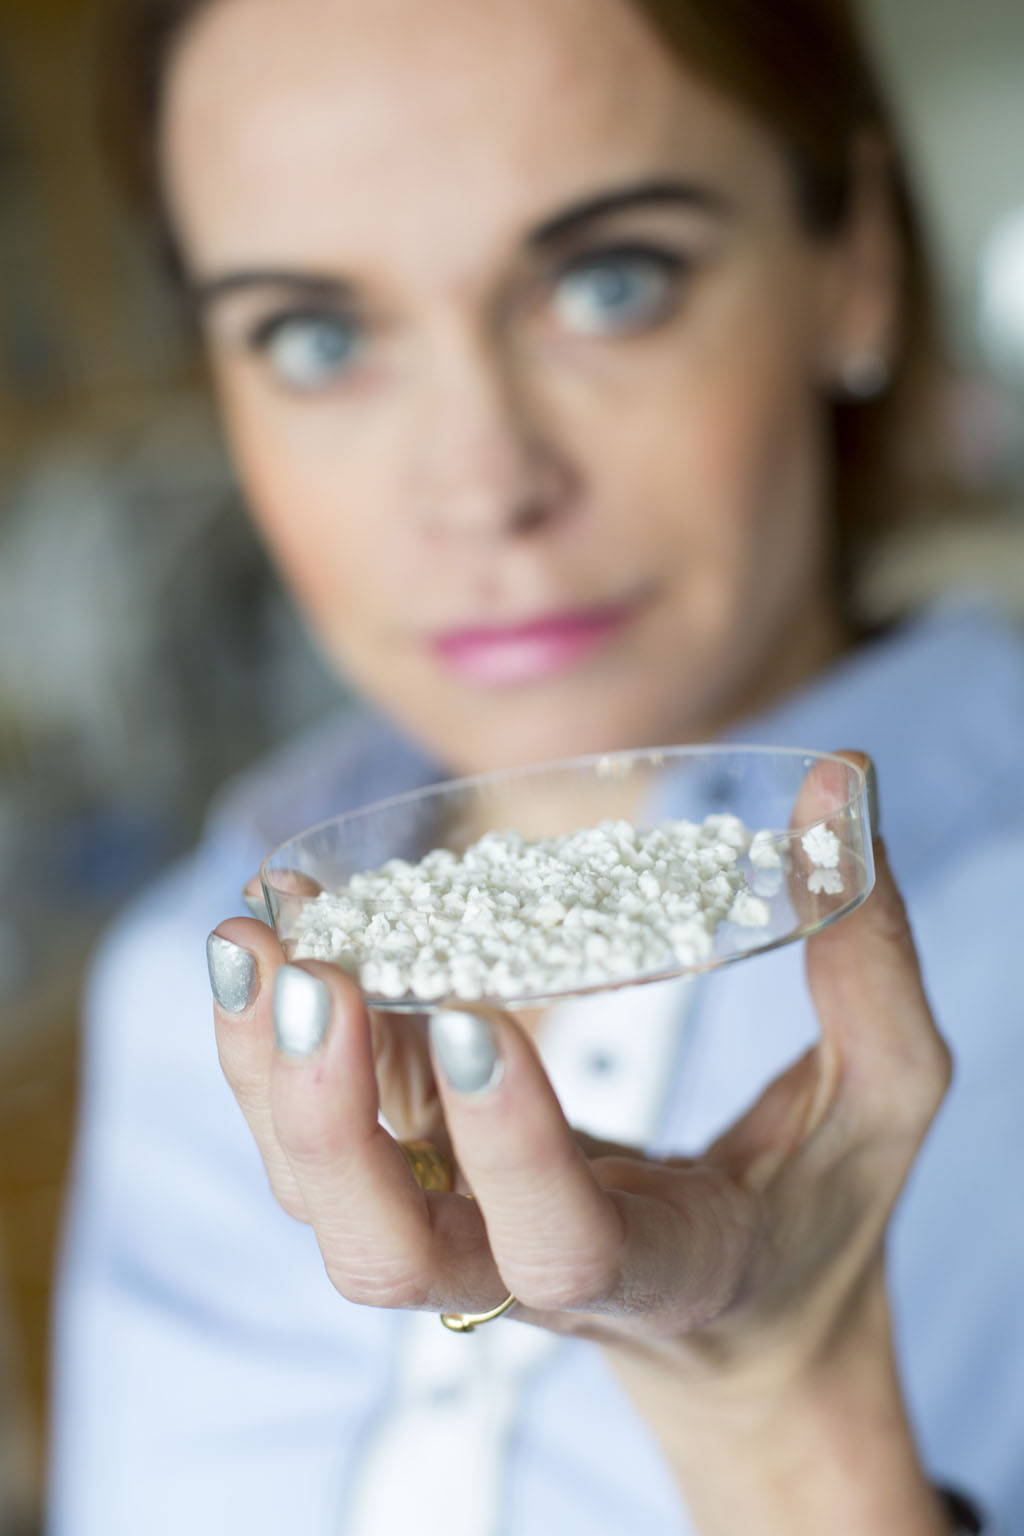 Image: Professor Maria Strømme with a sample of Upsalite (Photo courtesy of Disruptive Materials).